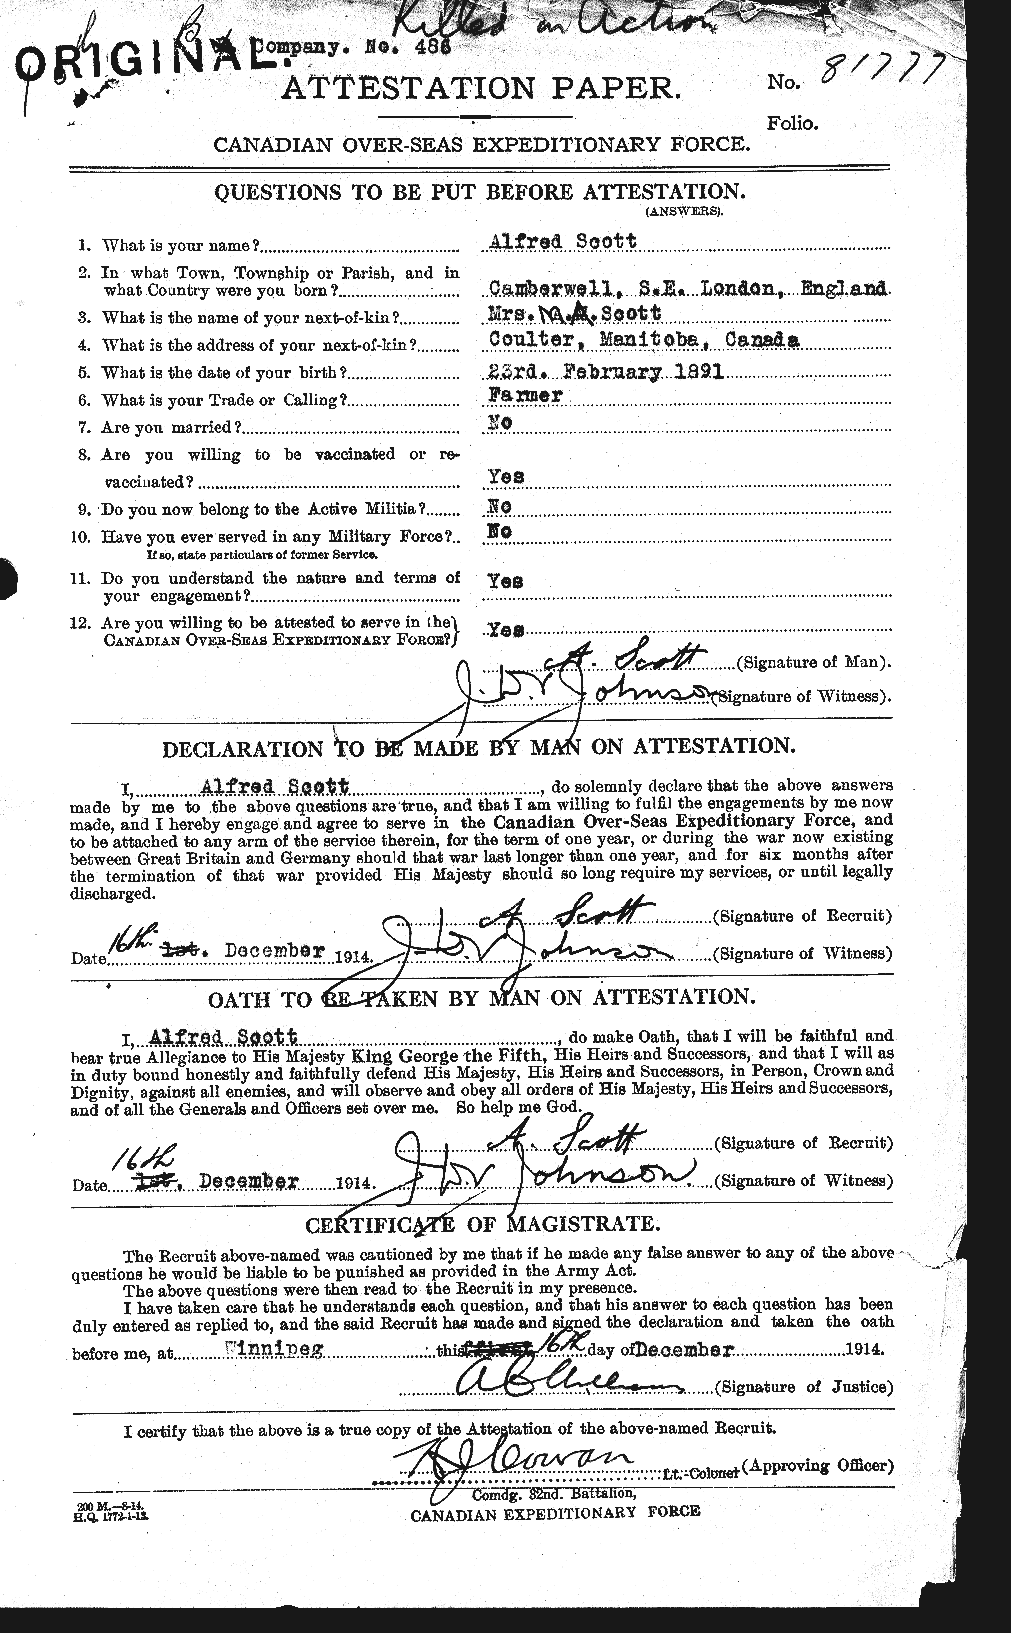 Personnel Records of the First World War - CEF 086588a